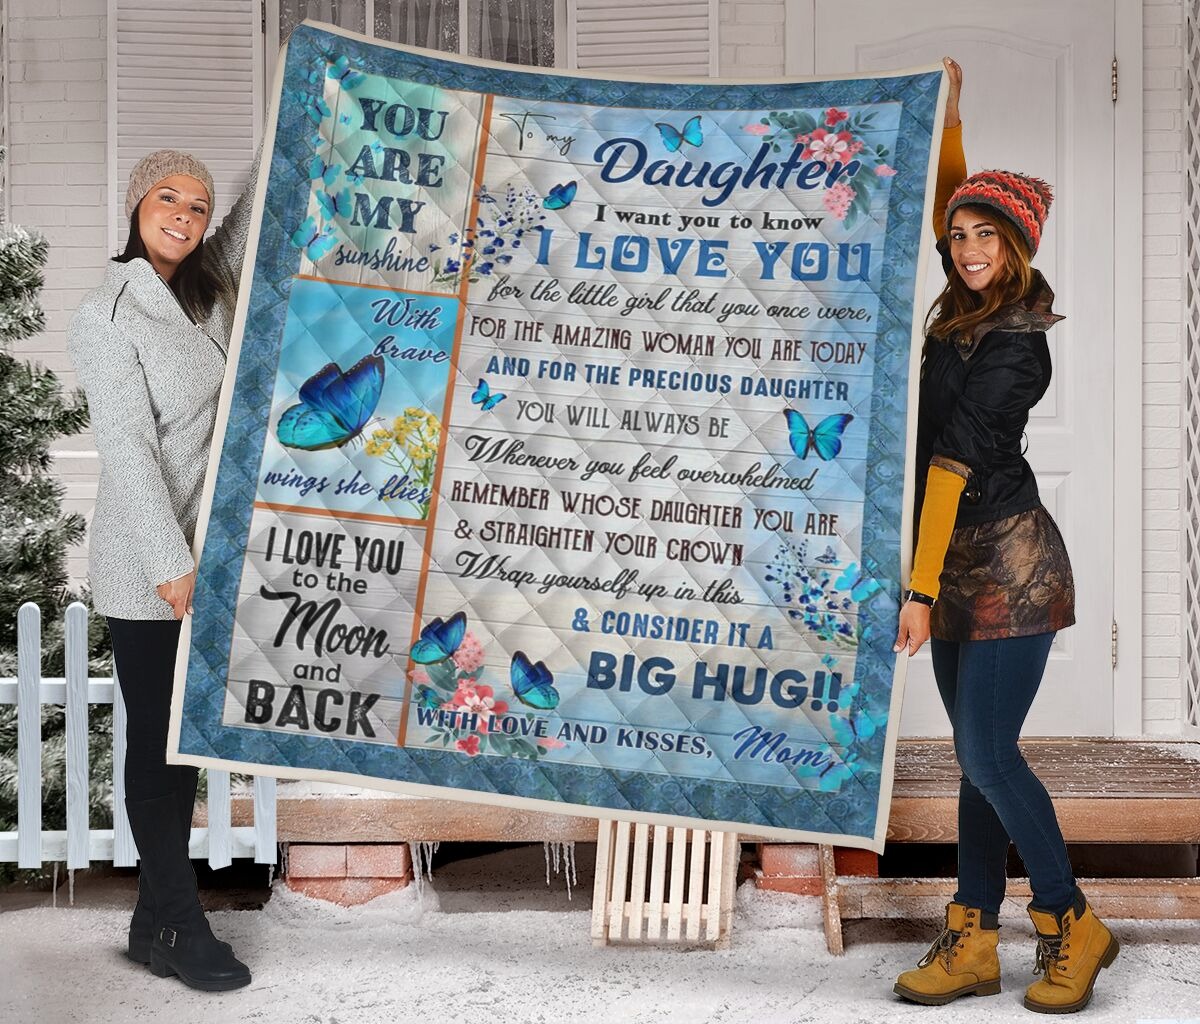 To my DaughterI want you to know I love you QUILT1